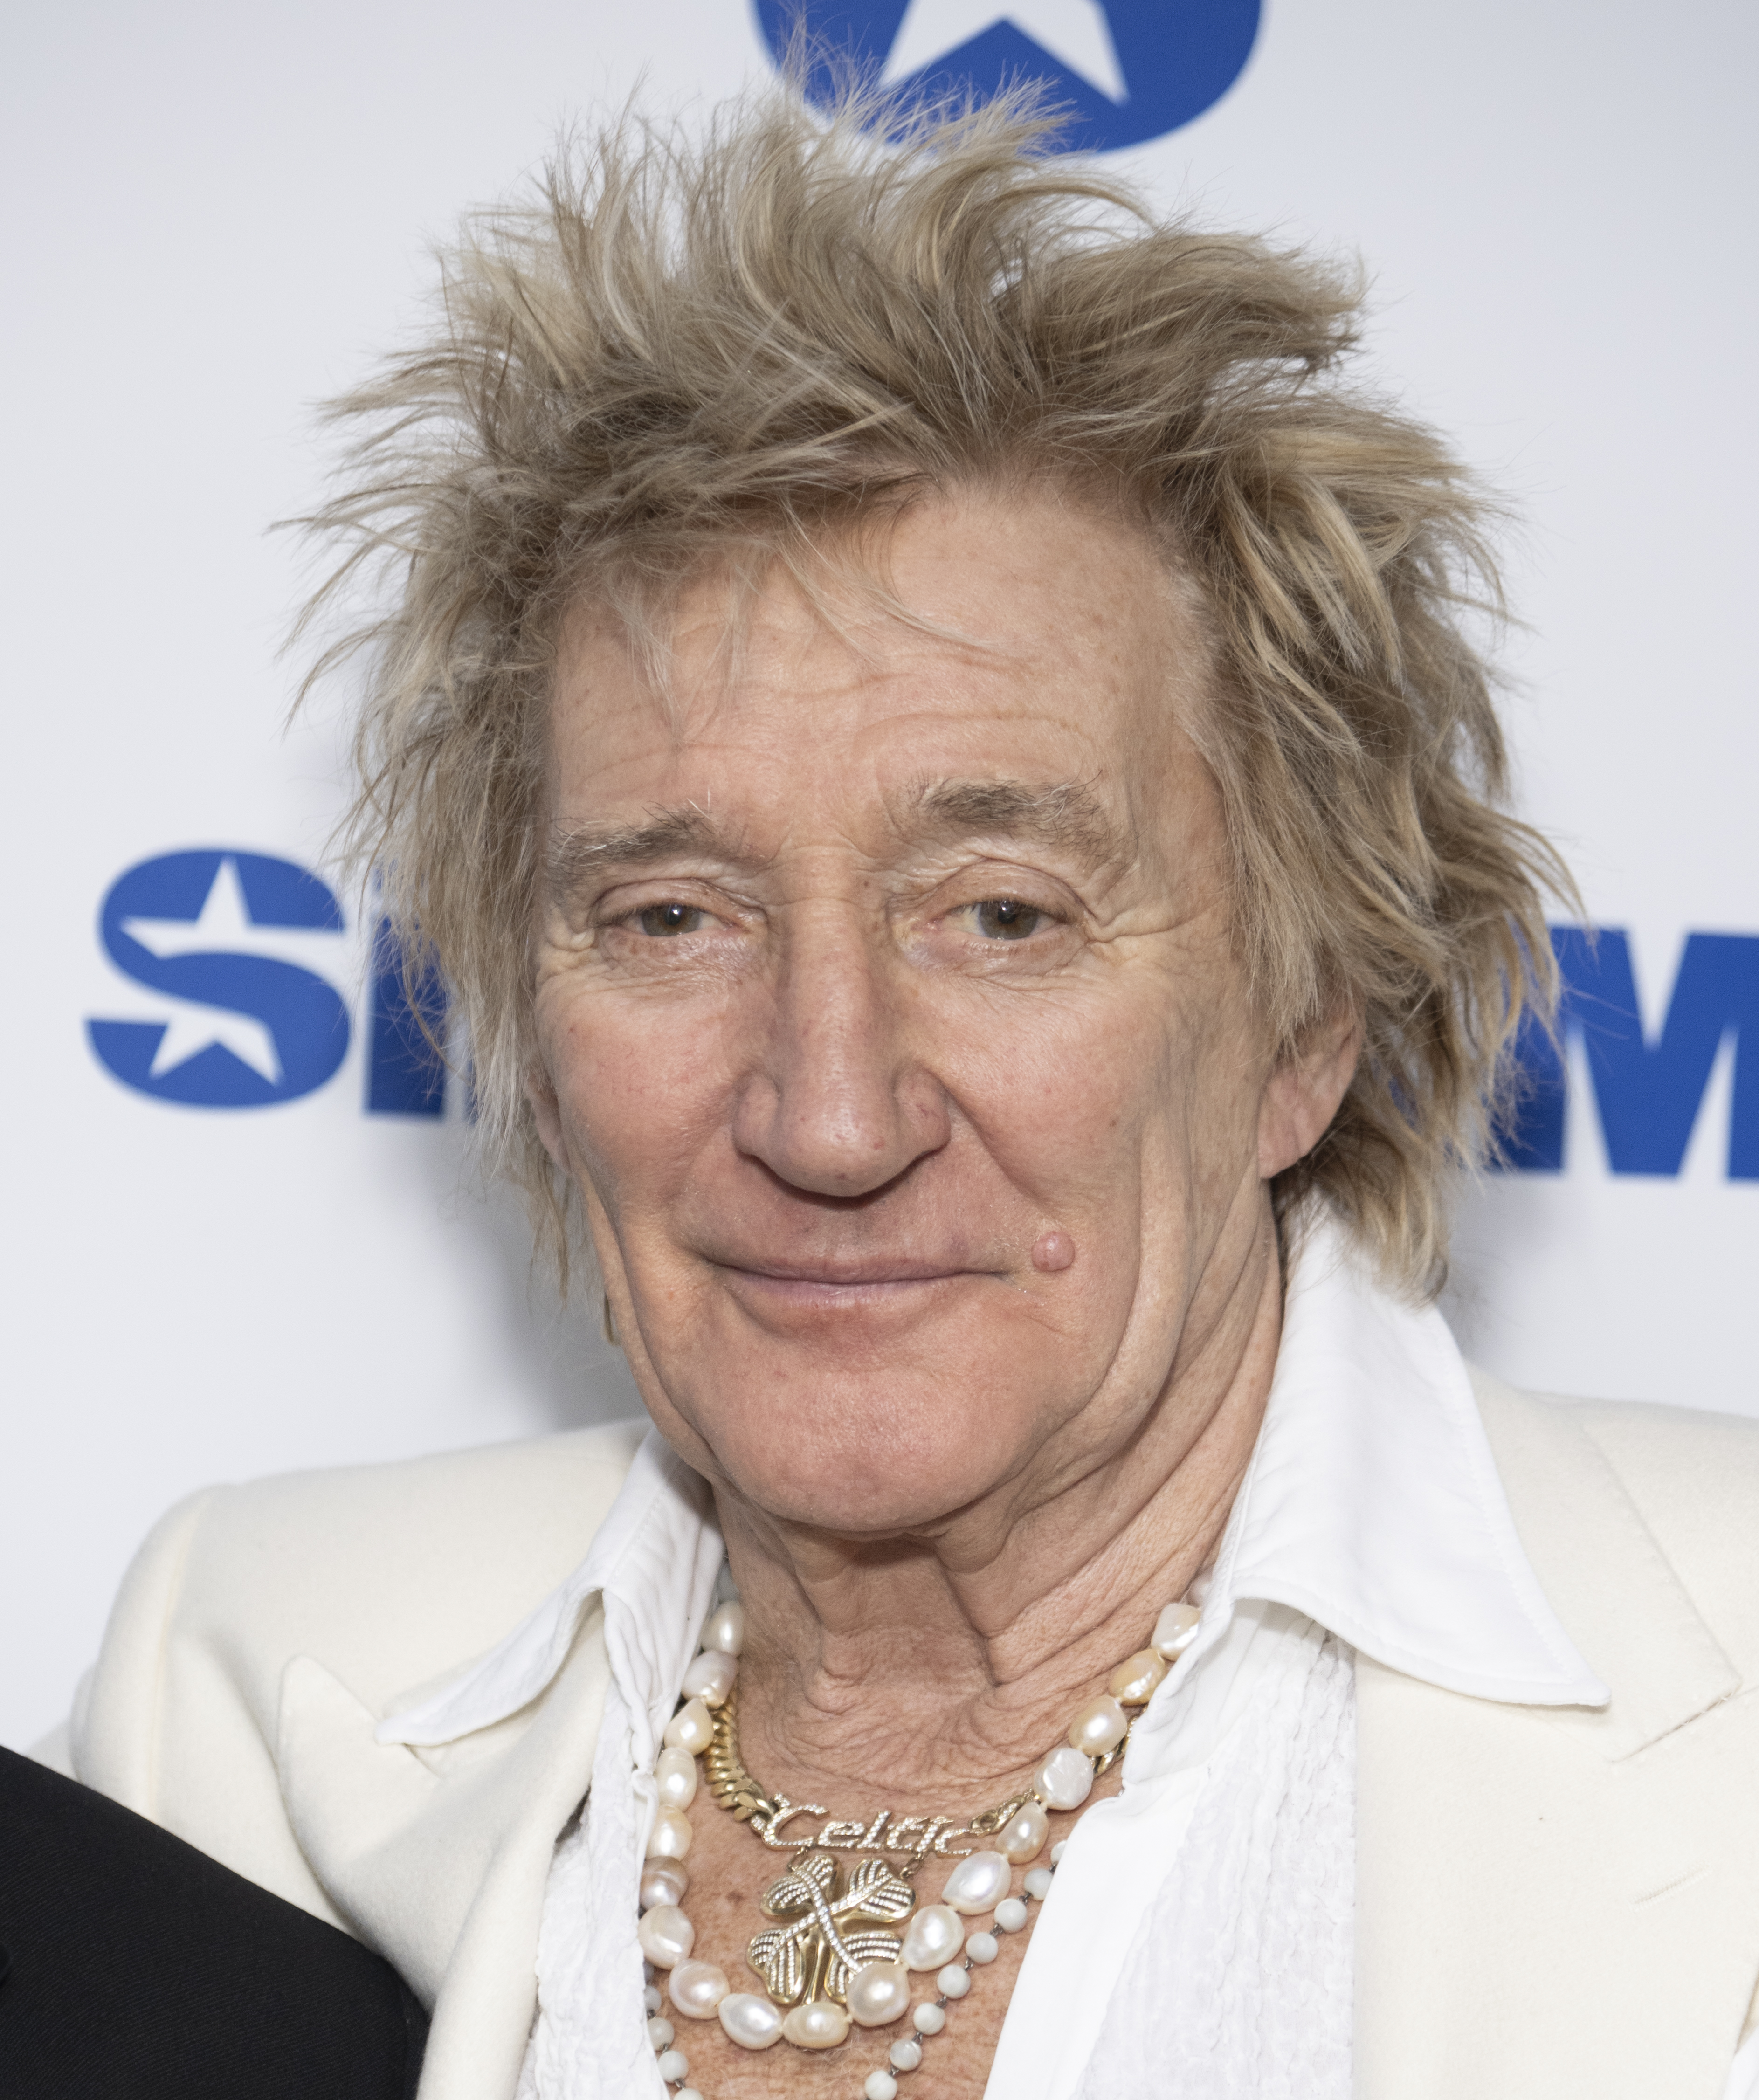 Sir Rod has reached an agreement with Irving Azoff’s Iconic Artists